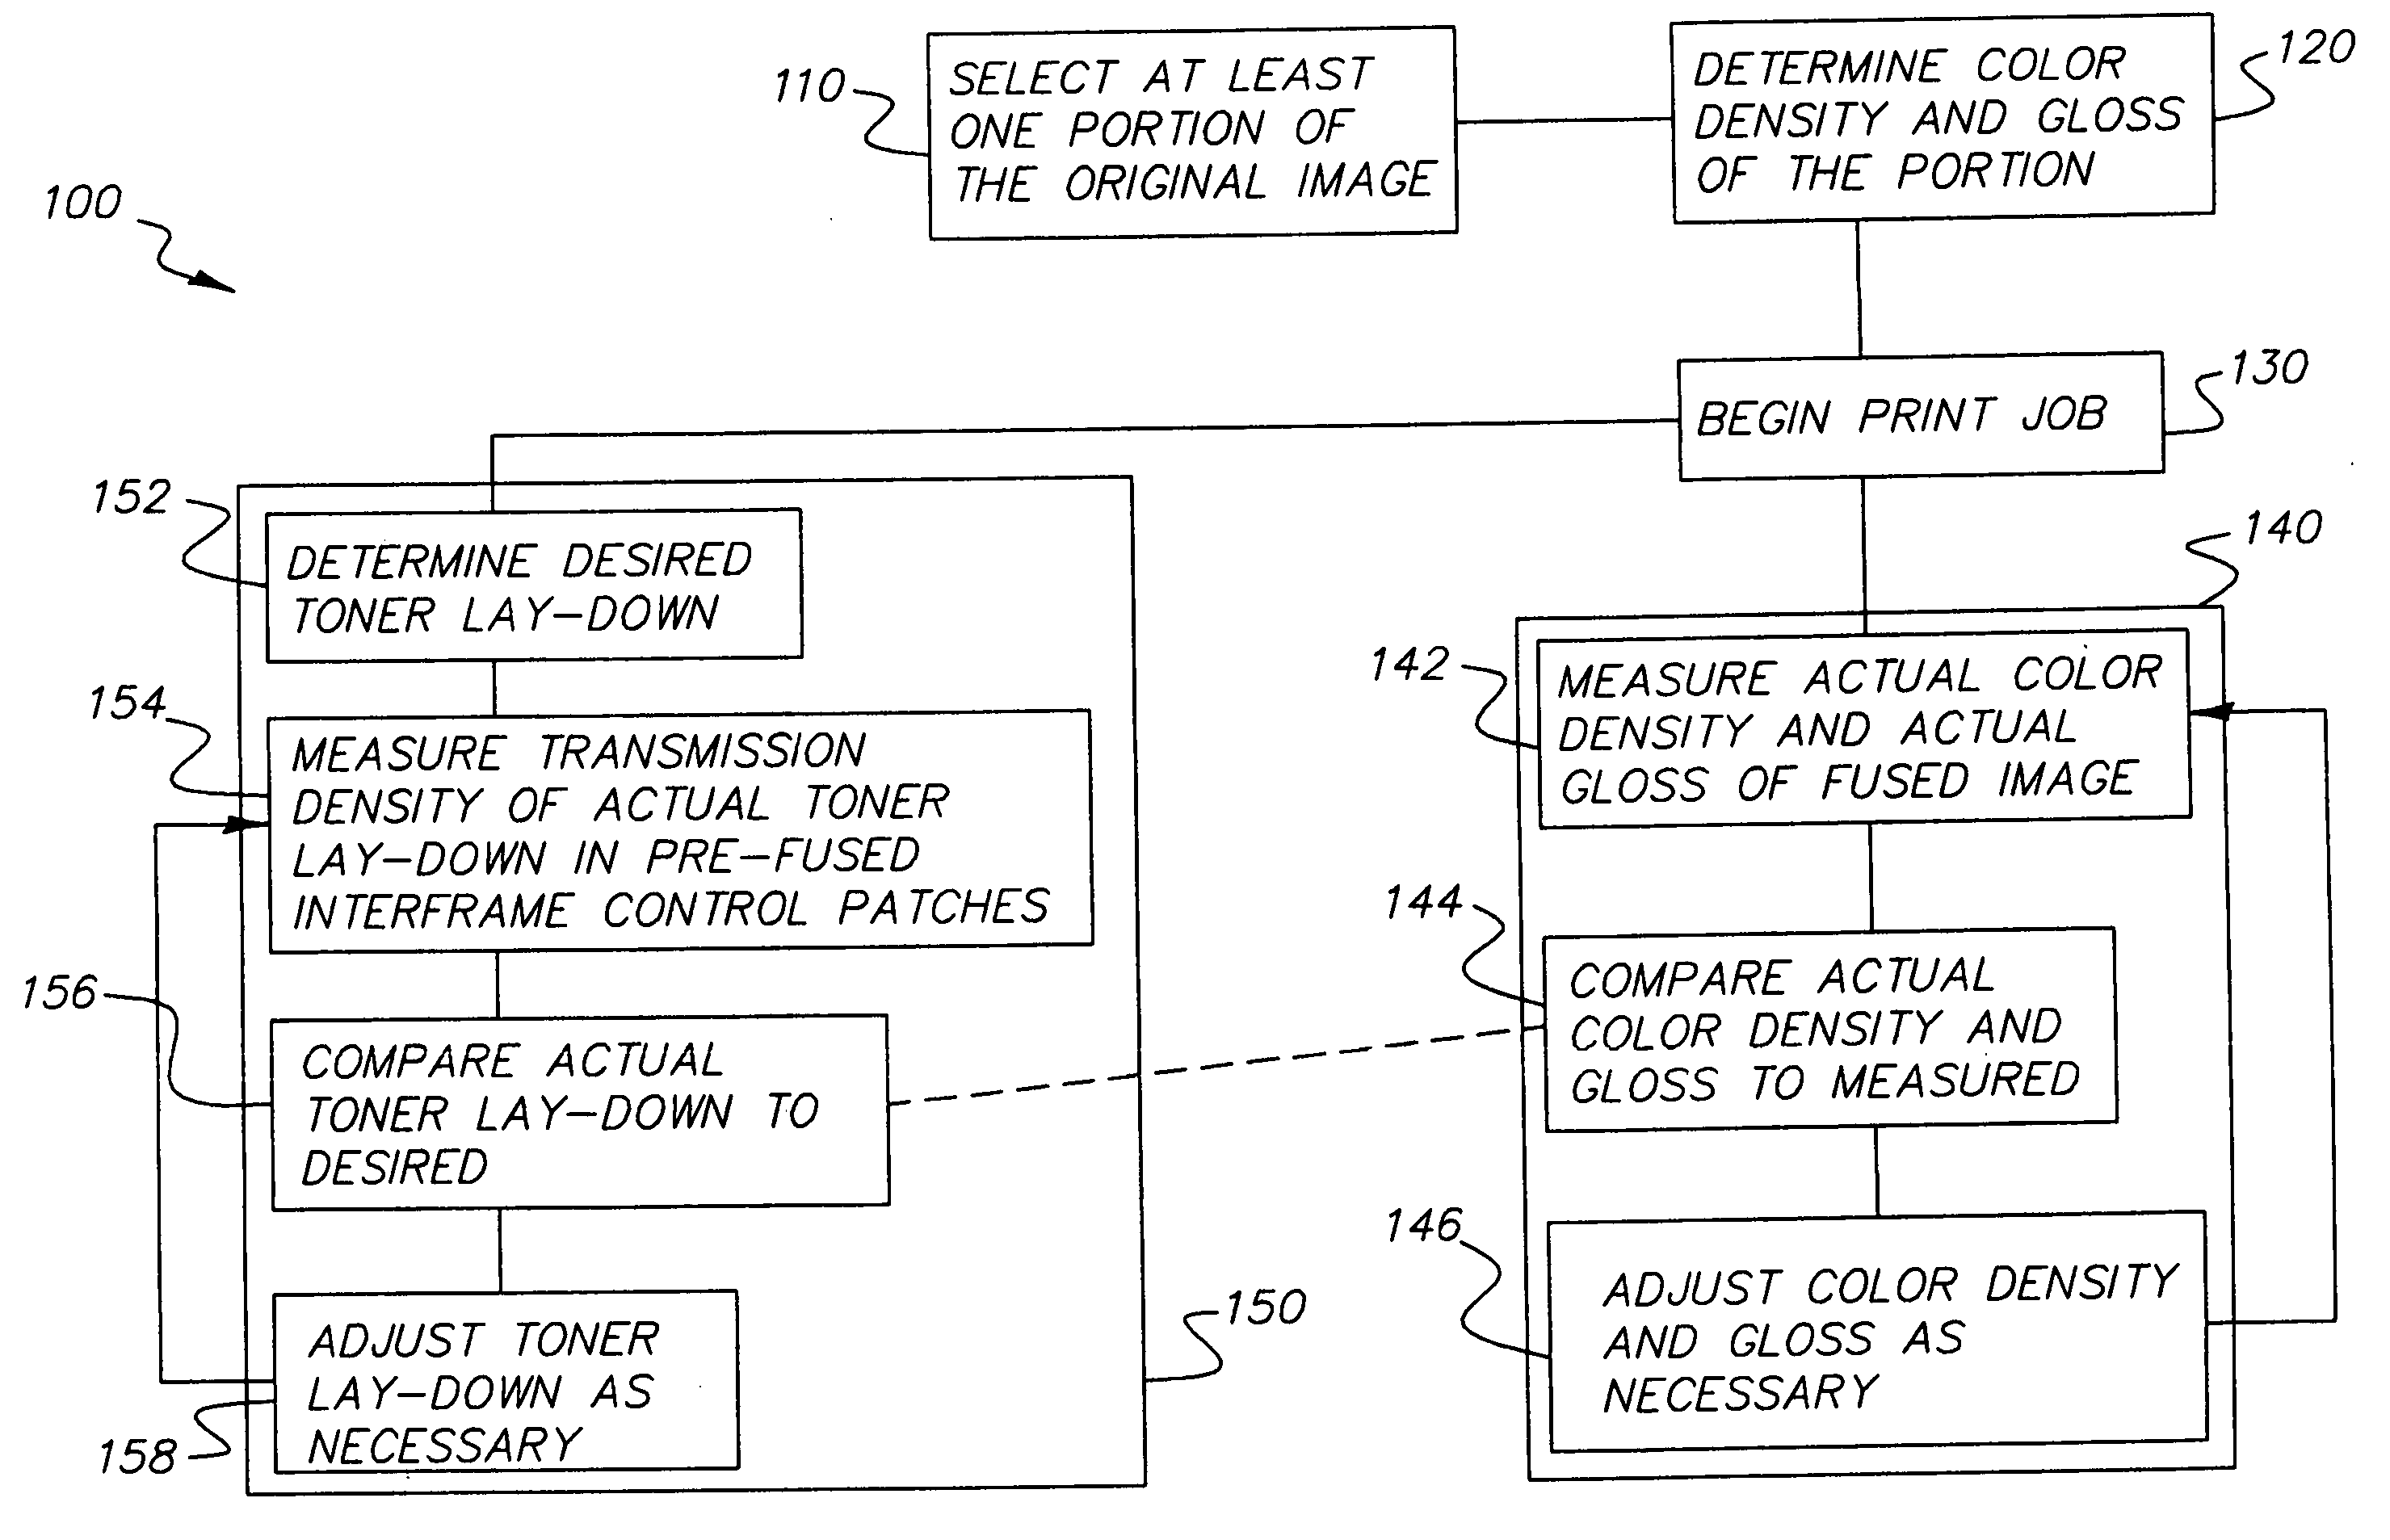 In-line appearance control method